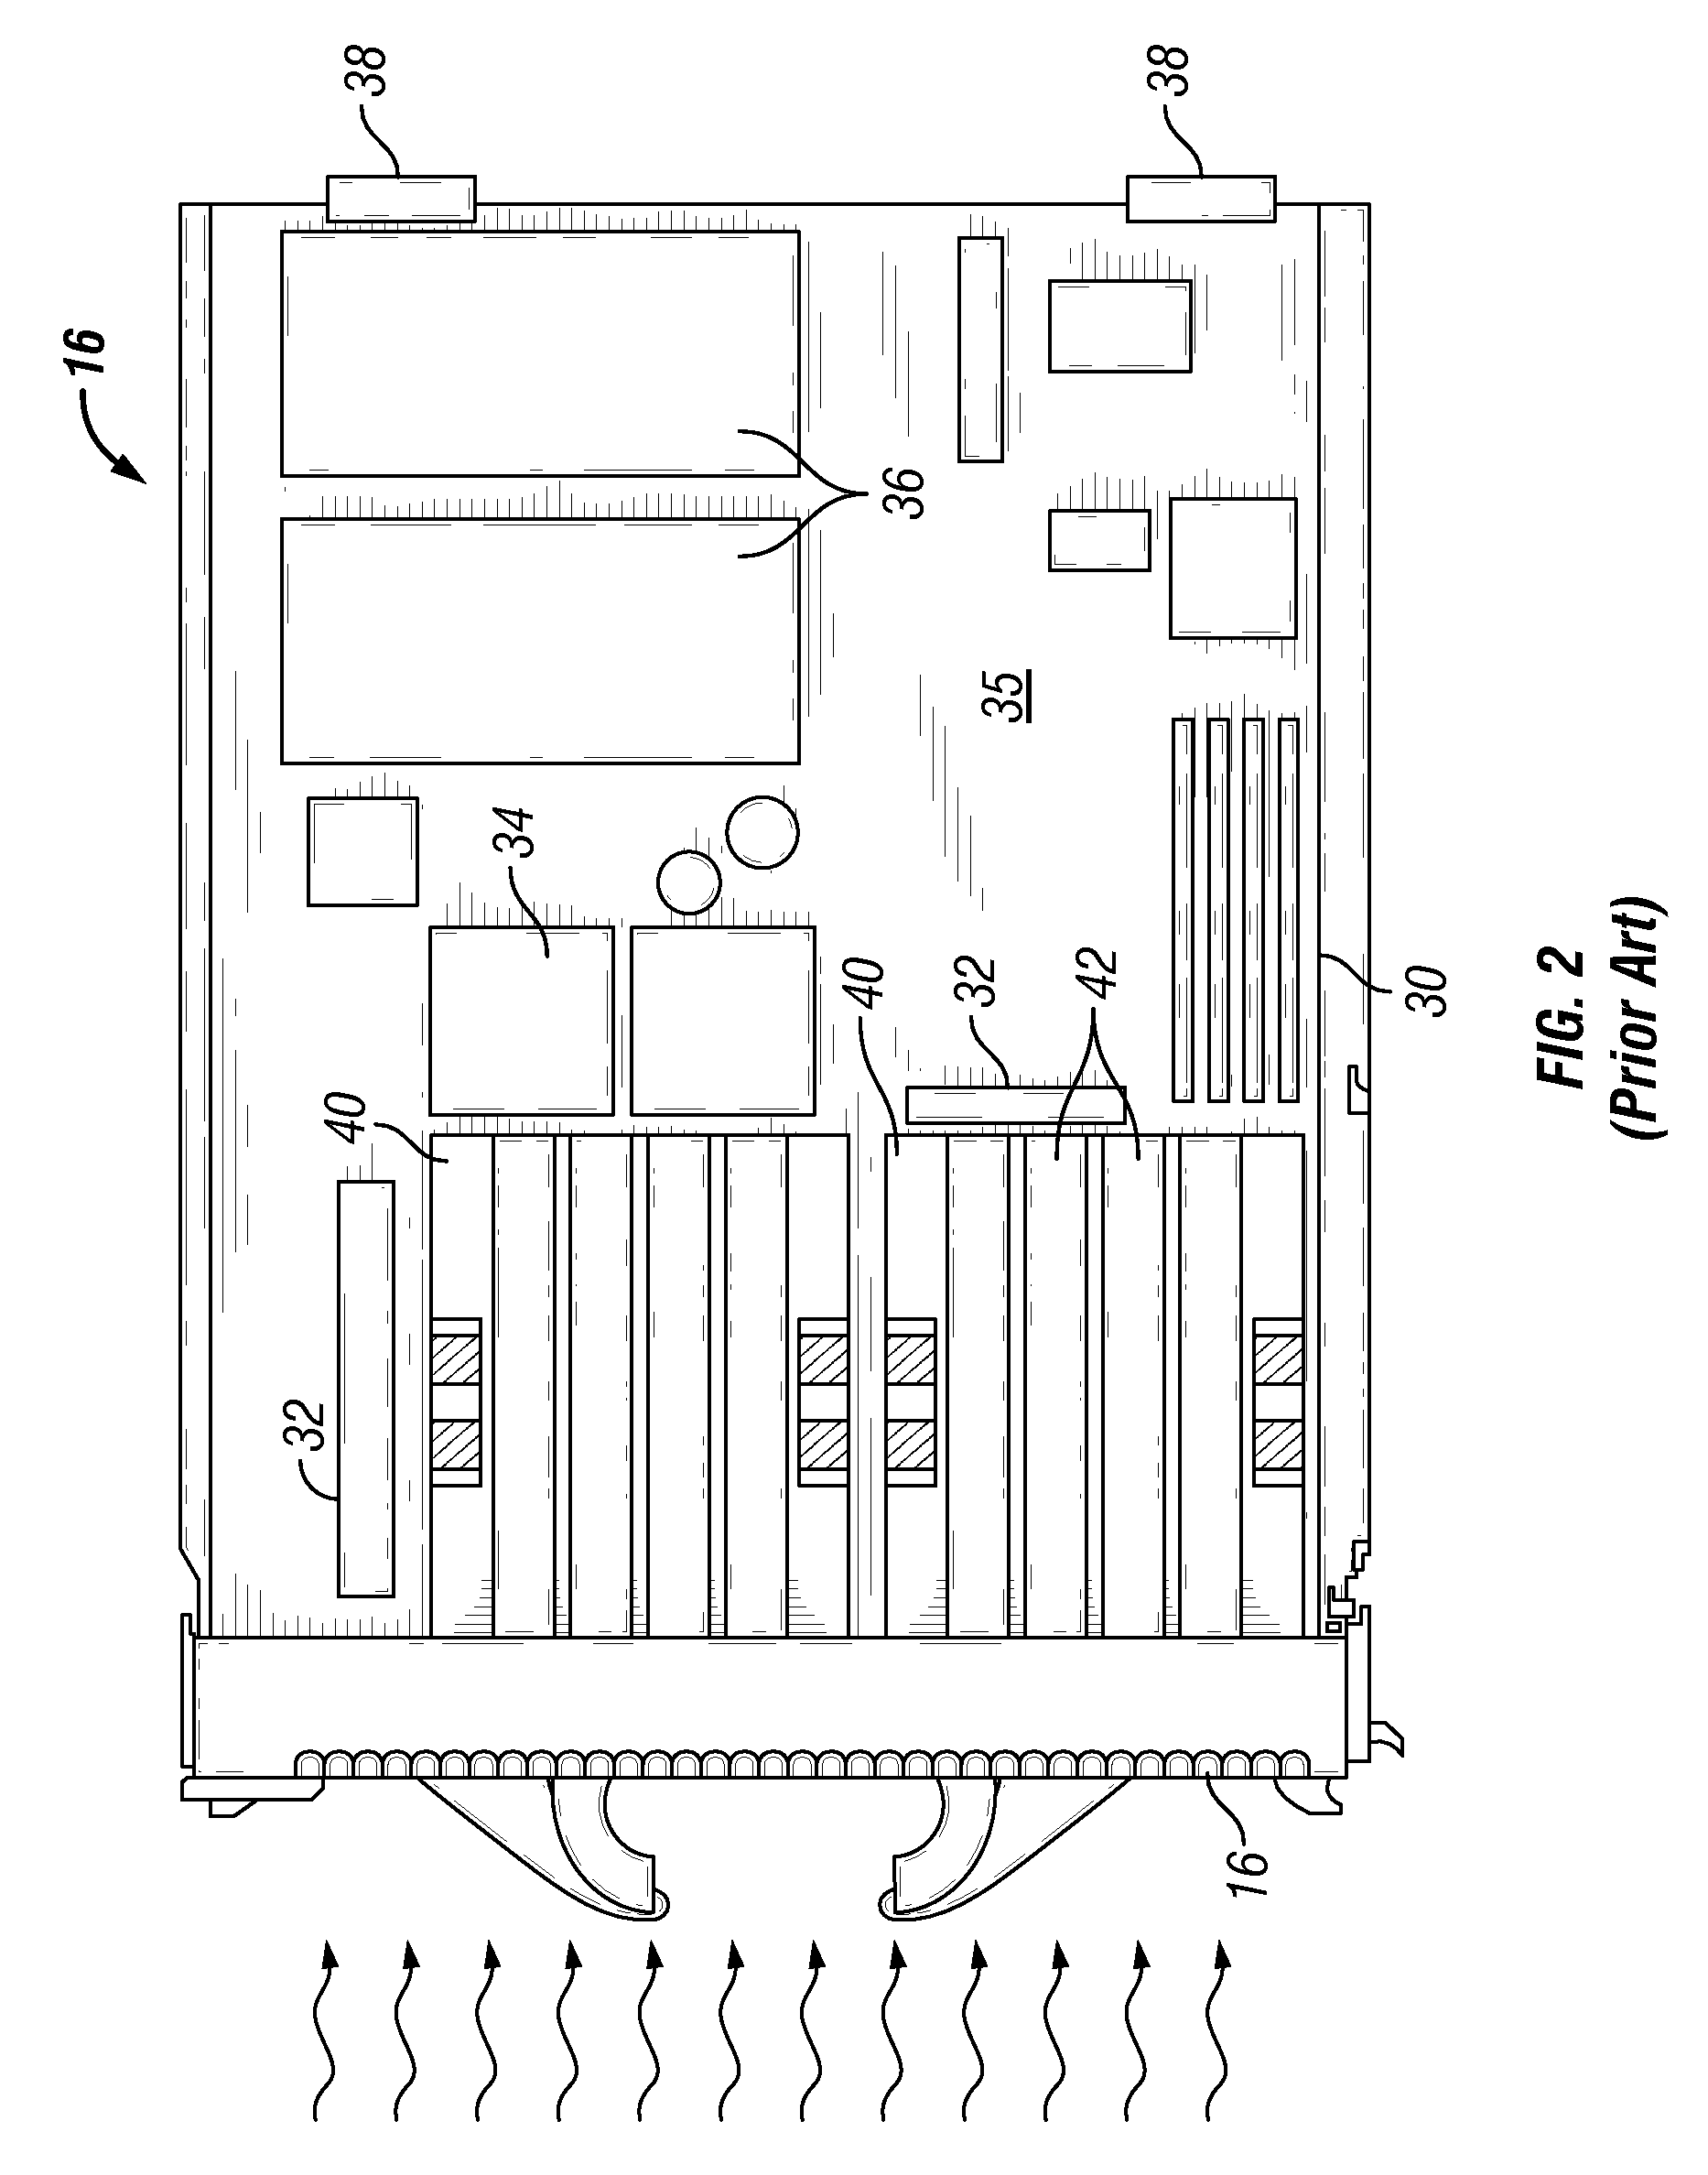 Capacitive detection of dust accumulation in a heat sink